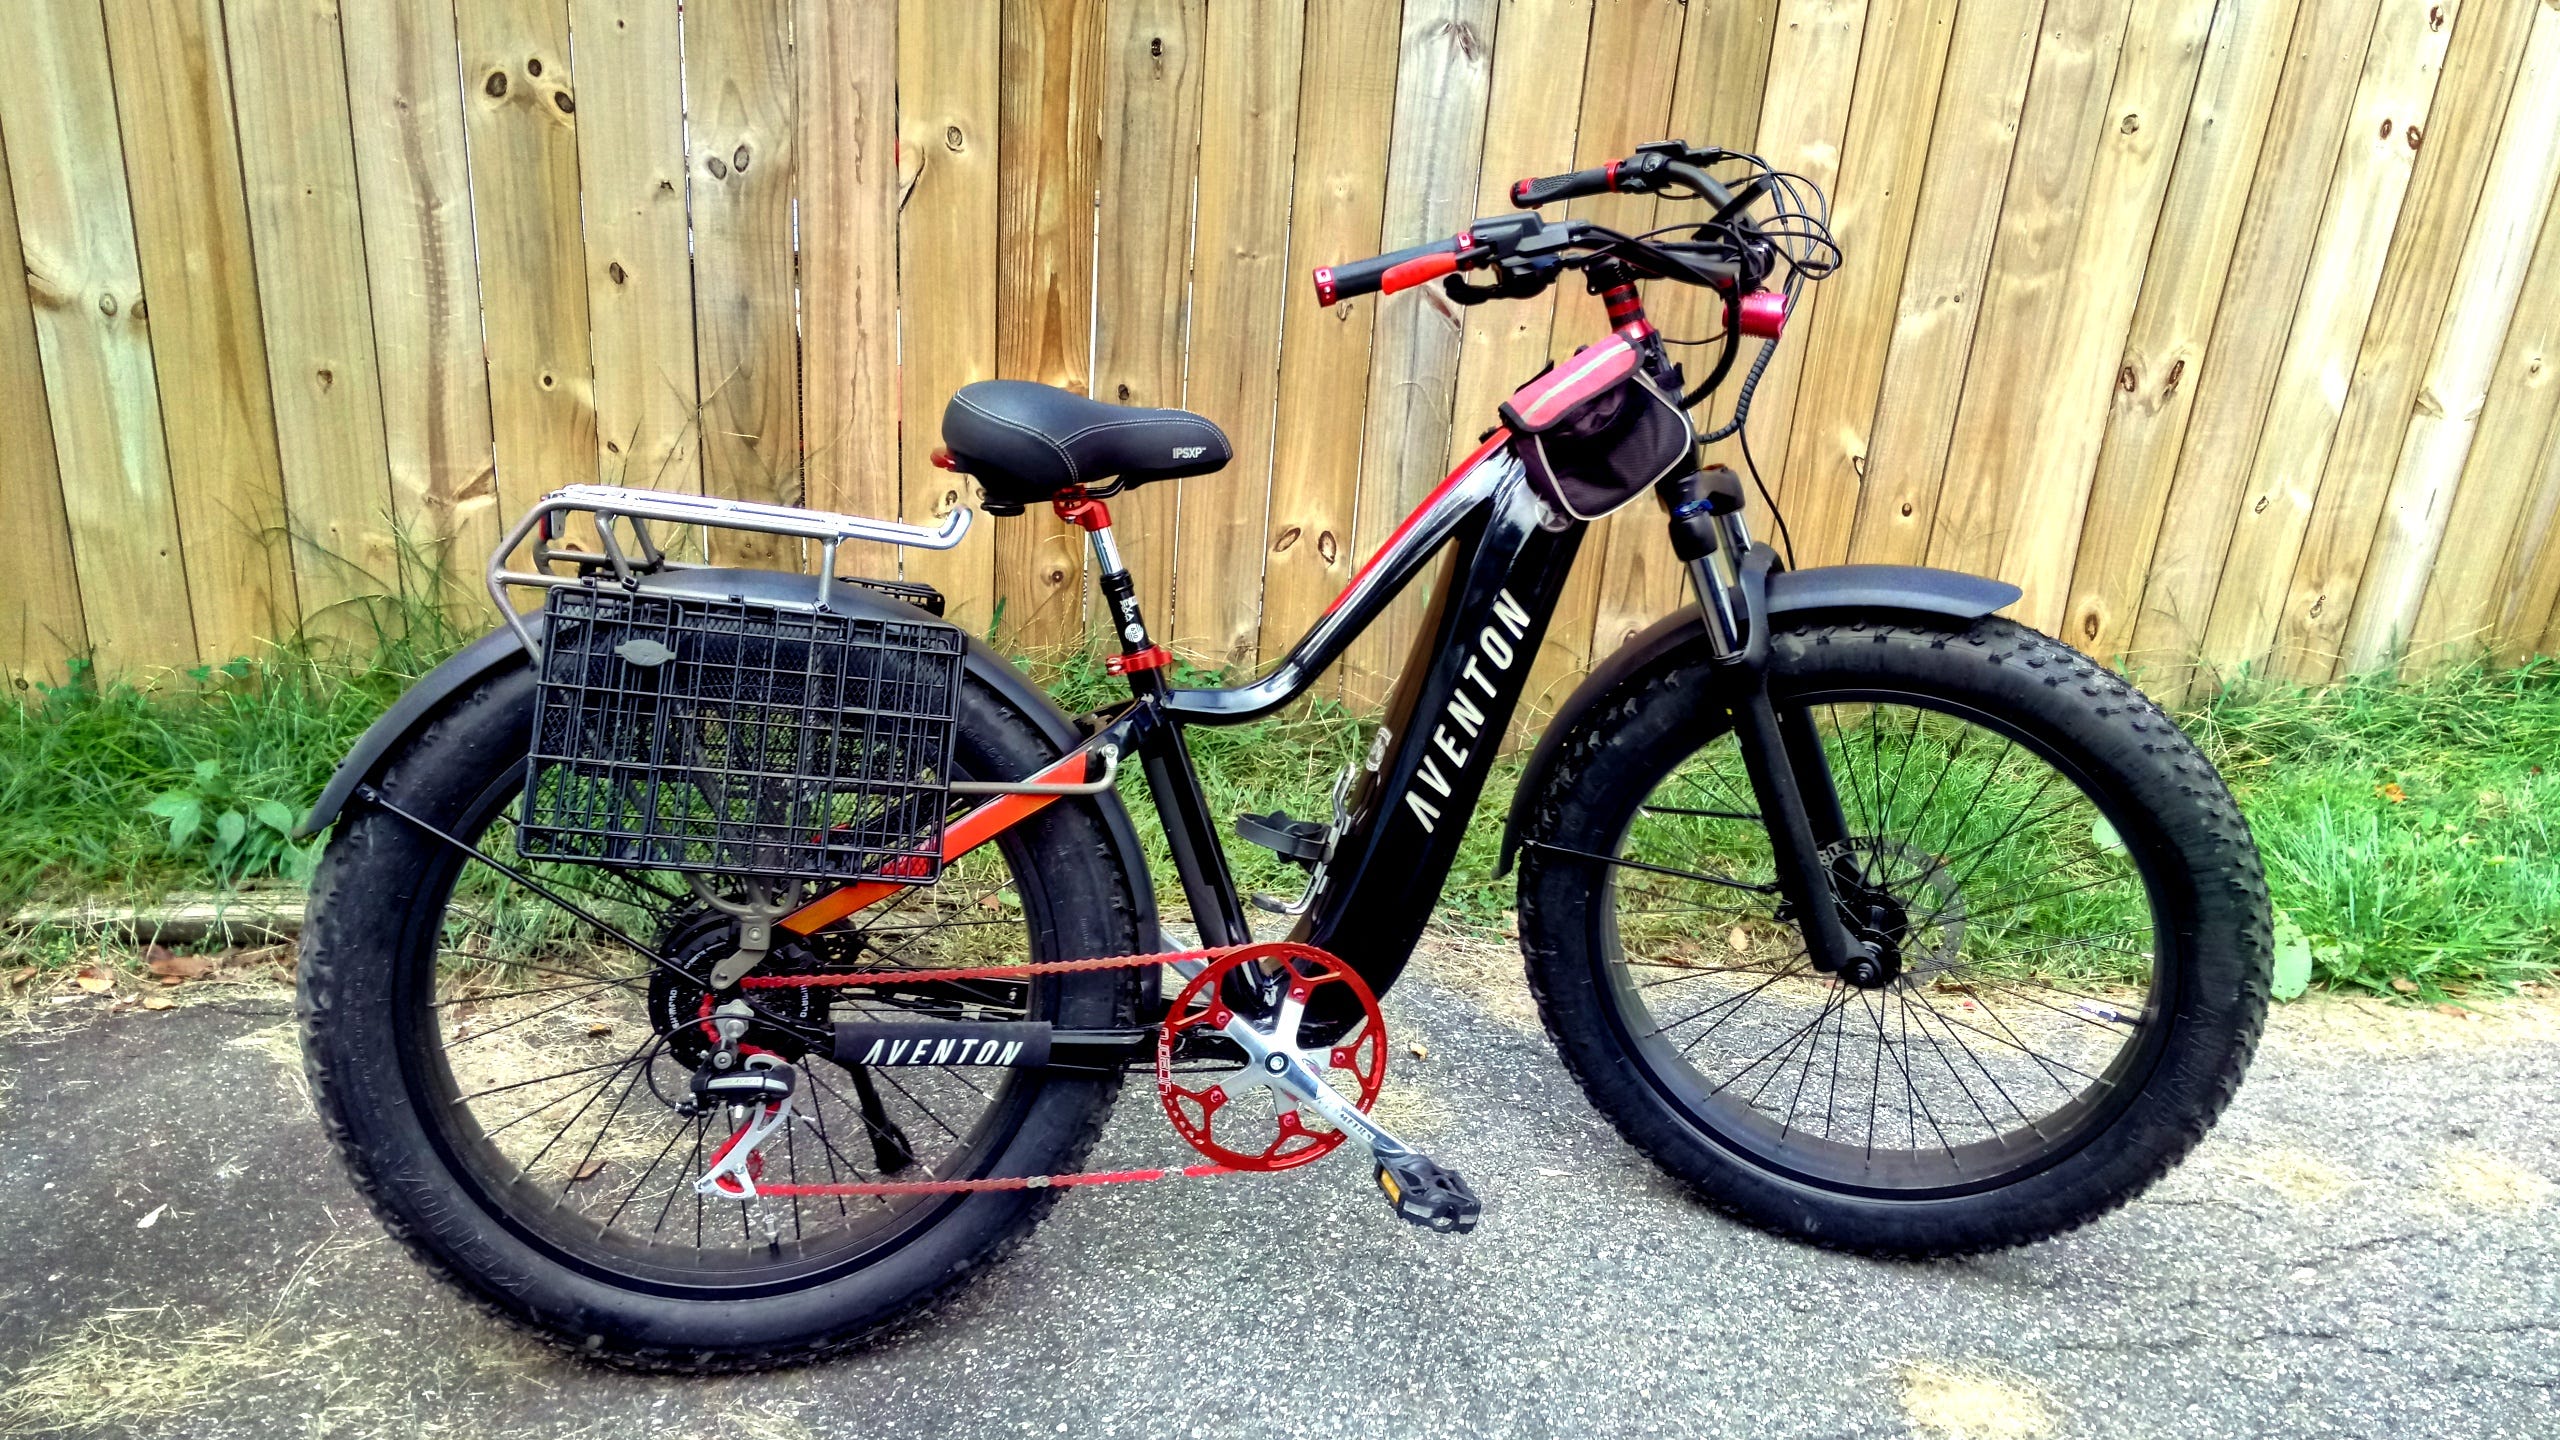 Misadventures In Buying And Customizing An E-Bike by Jason Knight Medium